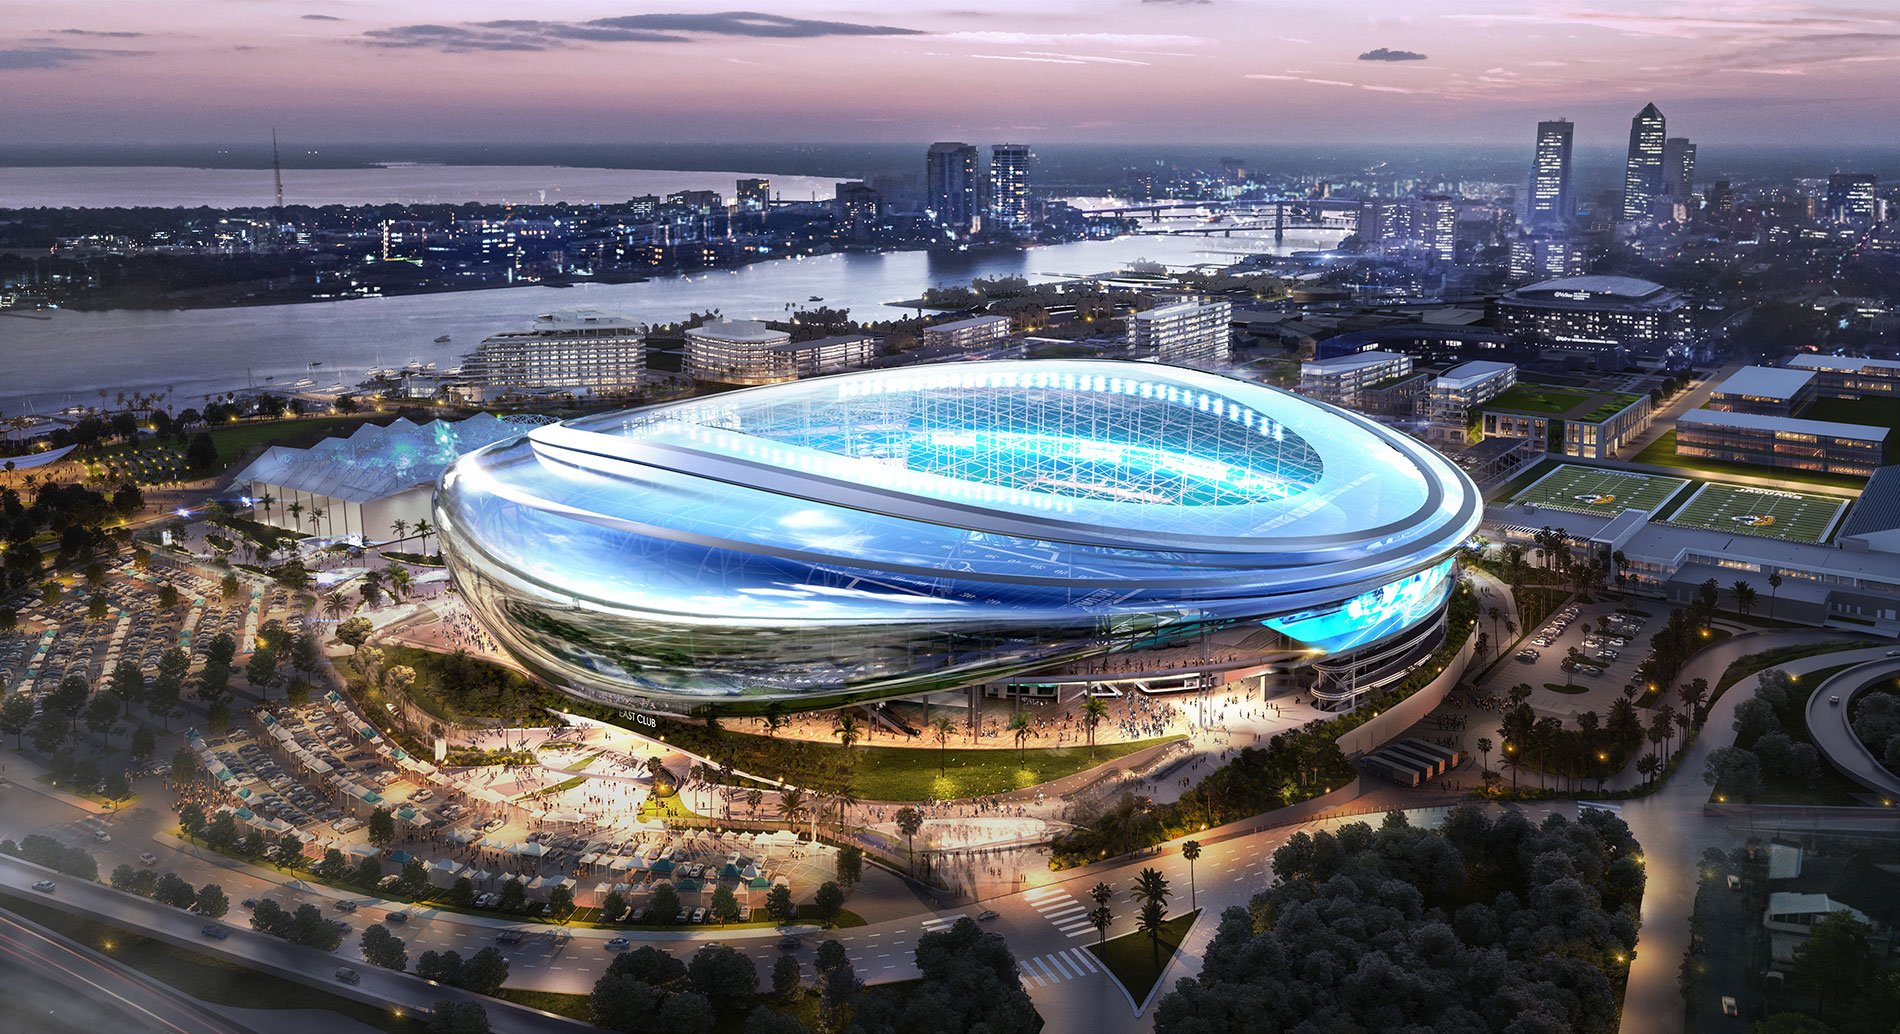 Renderings Revealed of NYCFC's New Stadium and Residential Neighborhood in  Willets Point - HOK